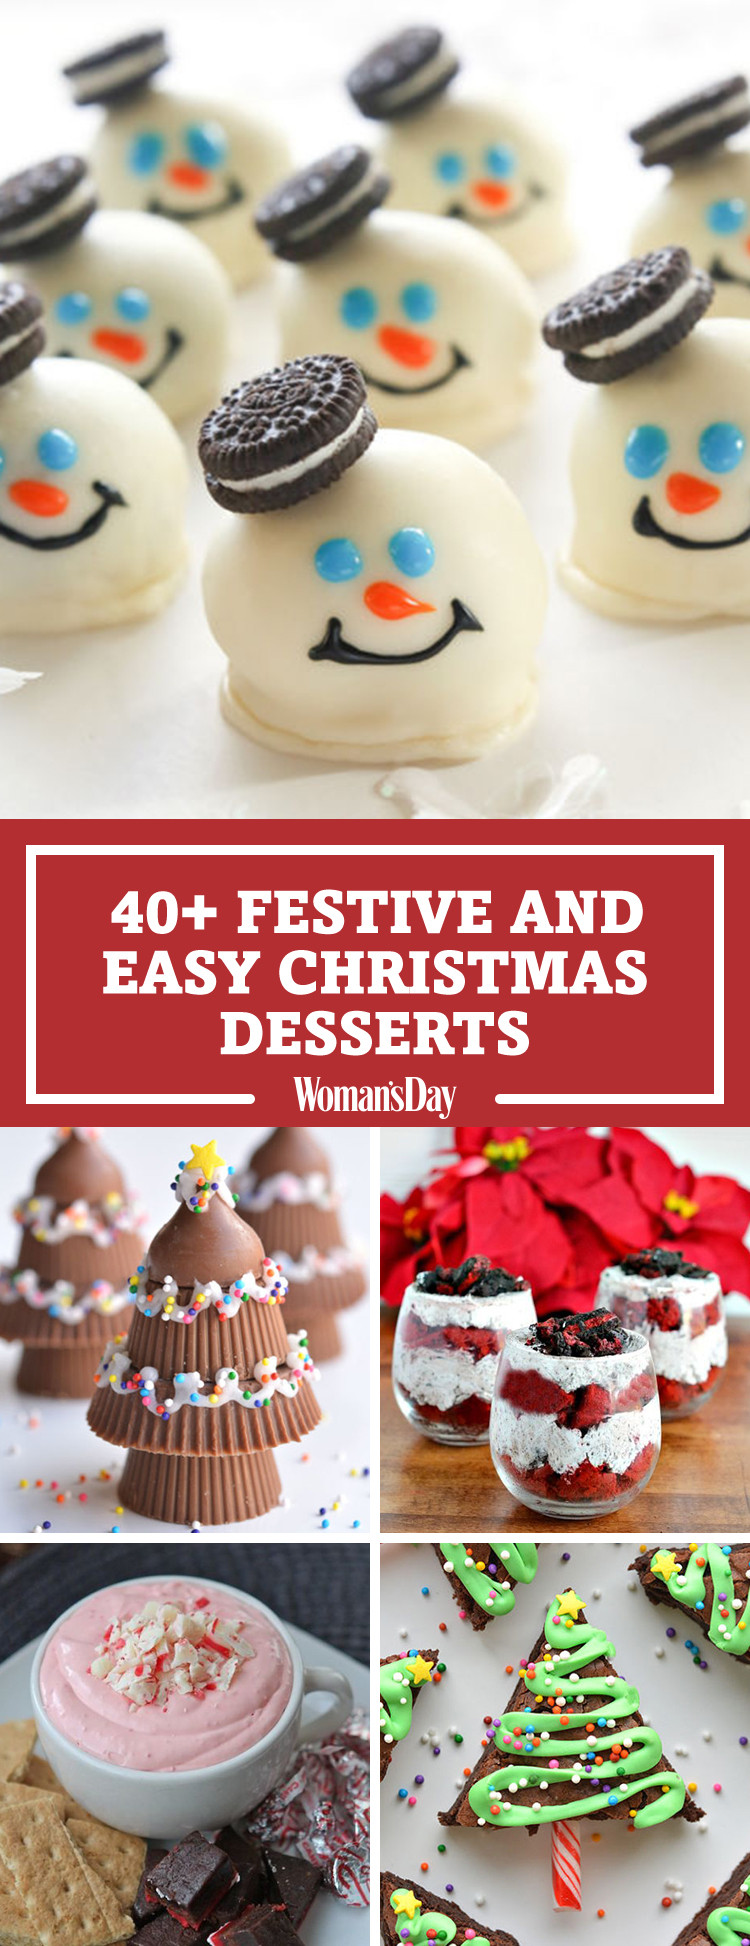 Fun Holiday Desserts
 57 Easy Christmas Dessert Recipes Best Ideas for Fun